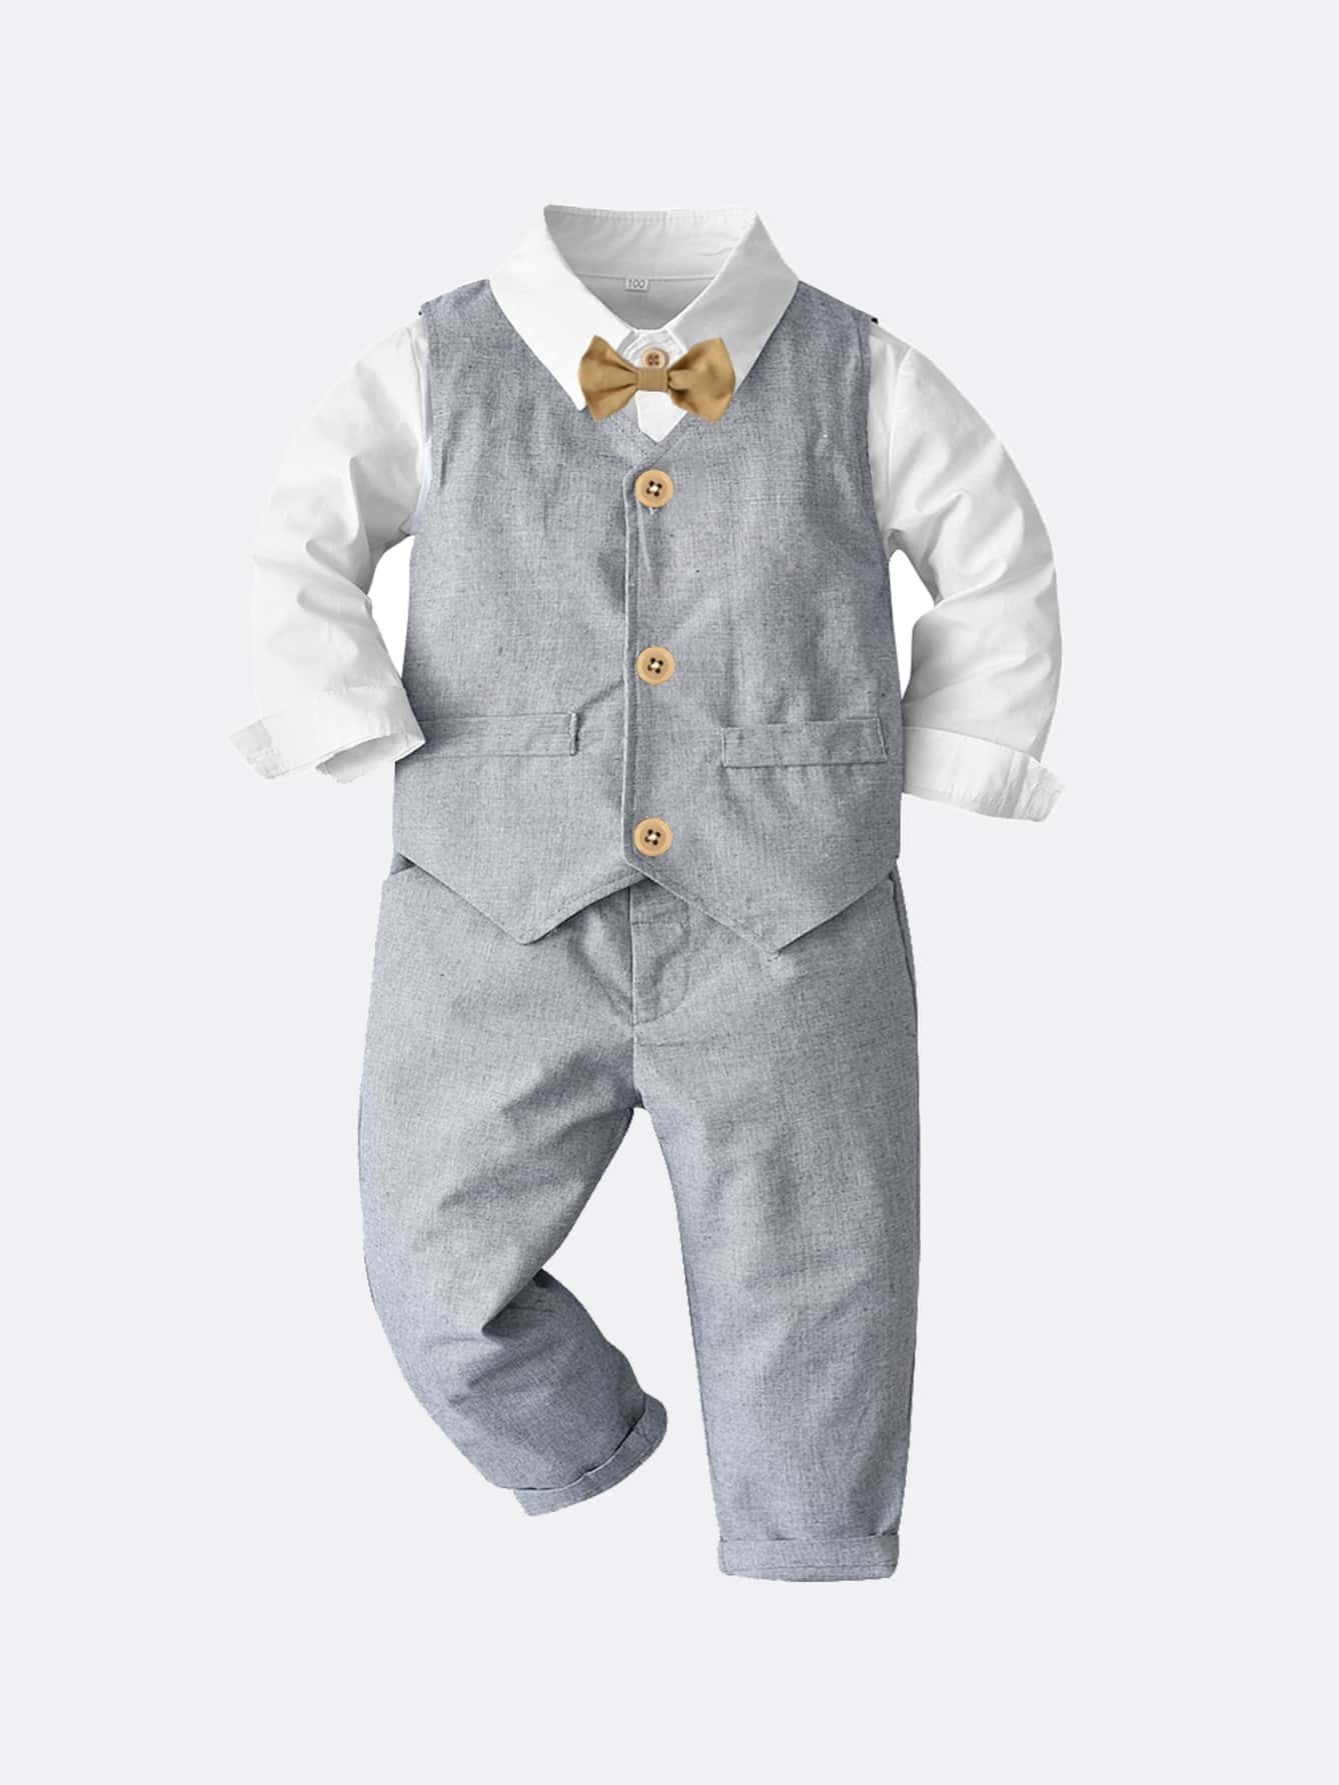 Baby Boys Gentleman Outfit Formal Suit Long Sleeve Clothes Set | Save ...